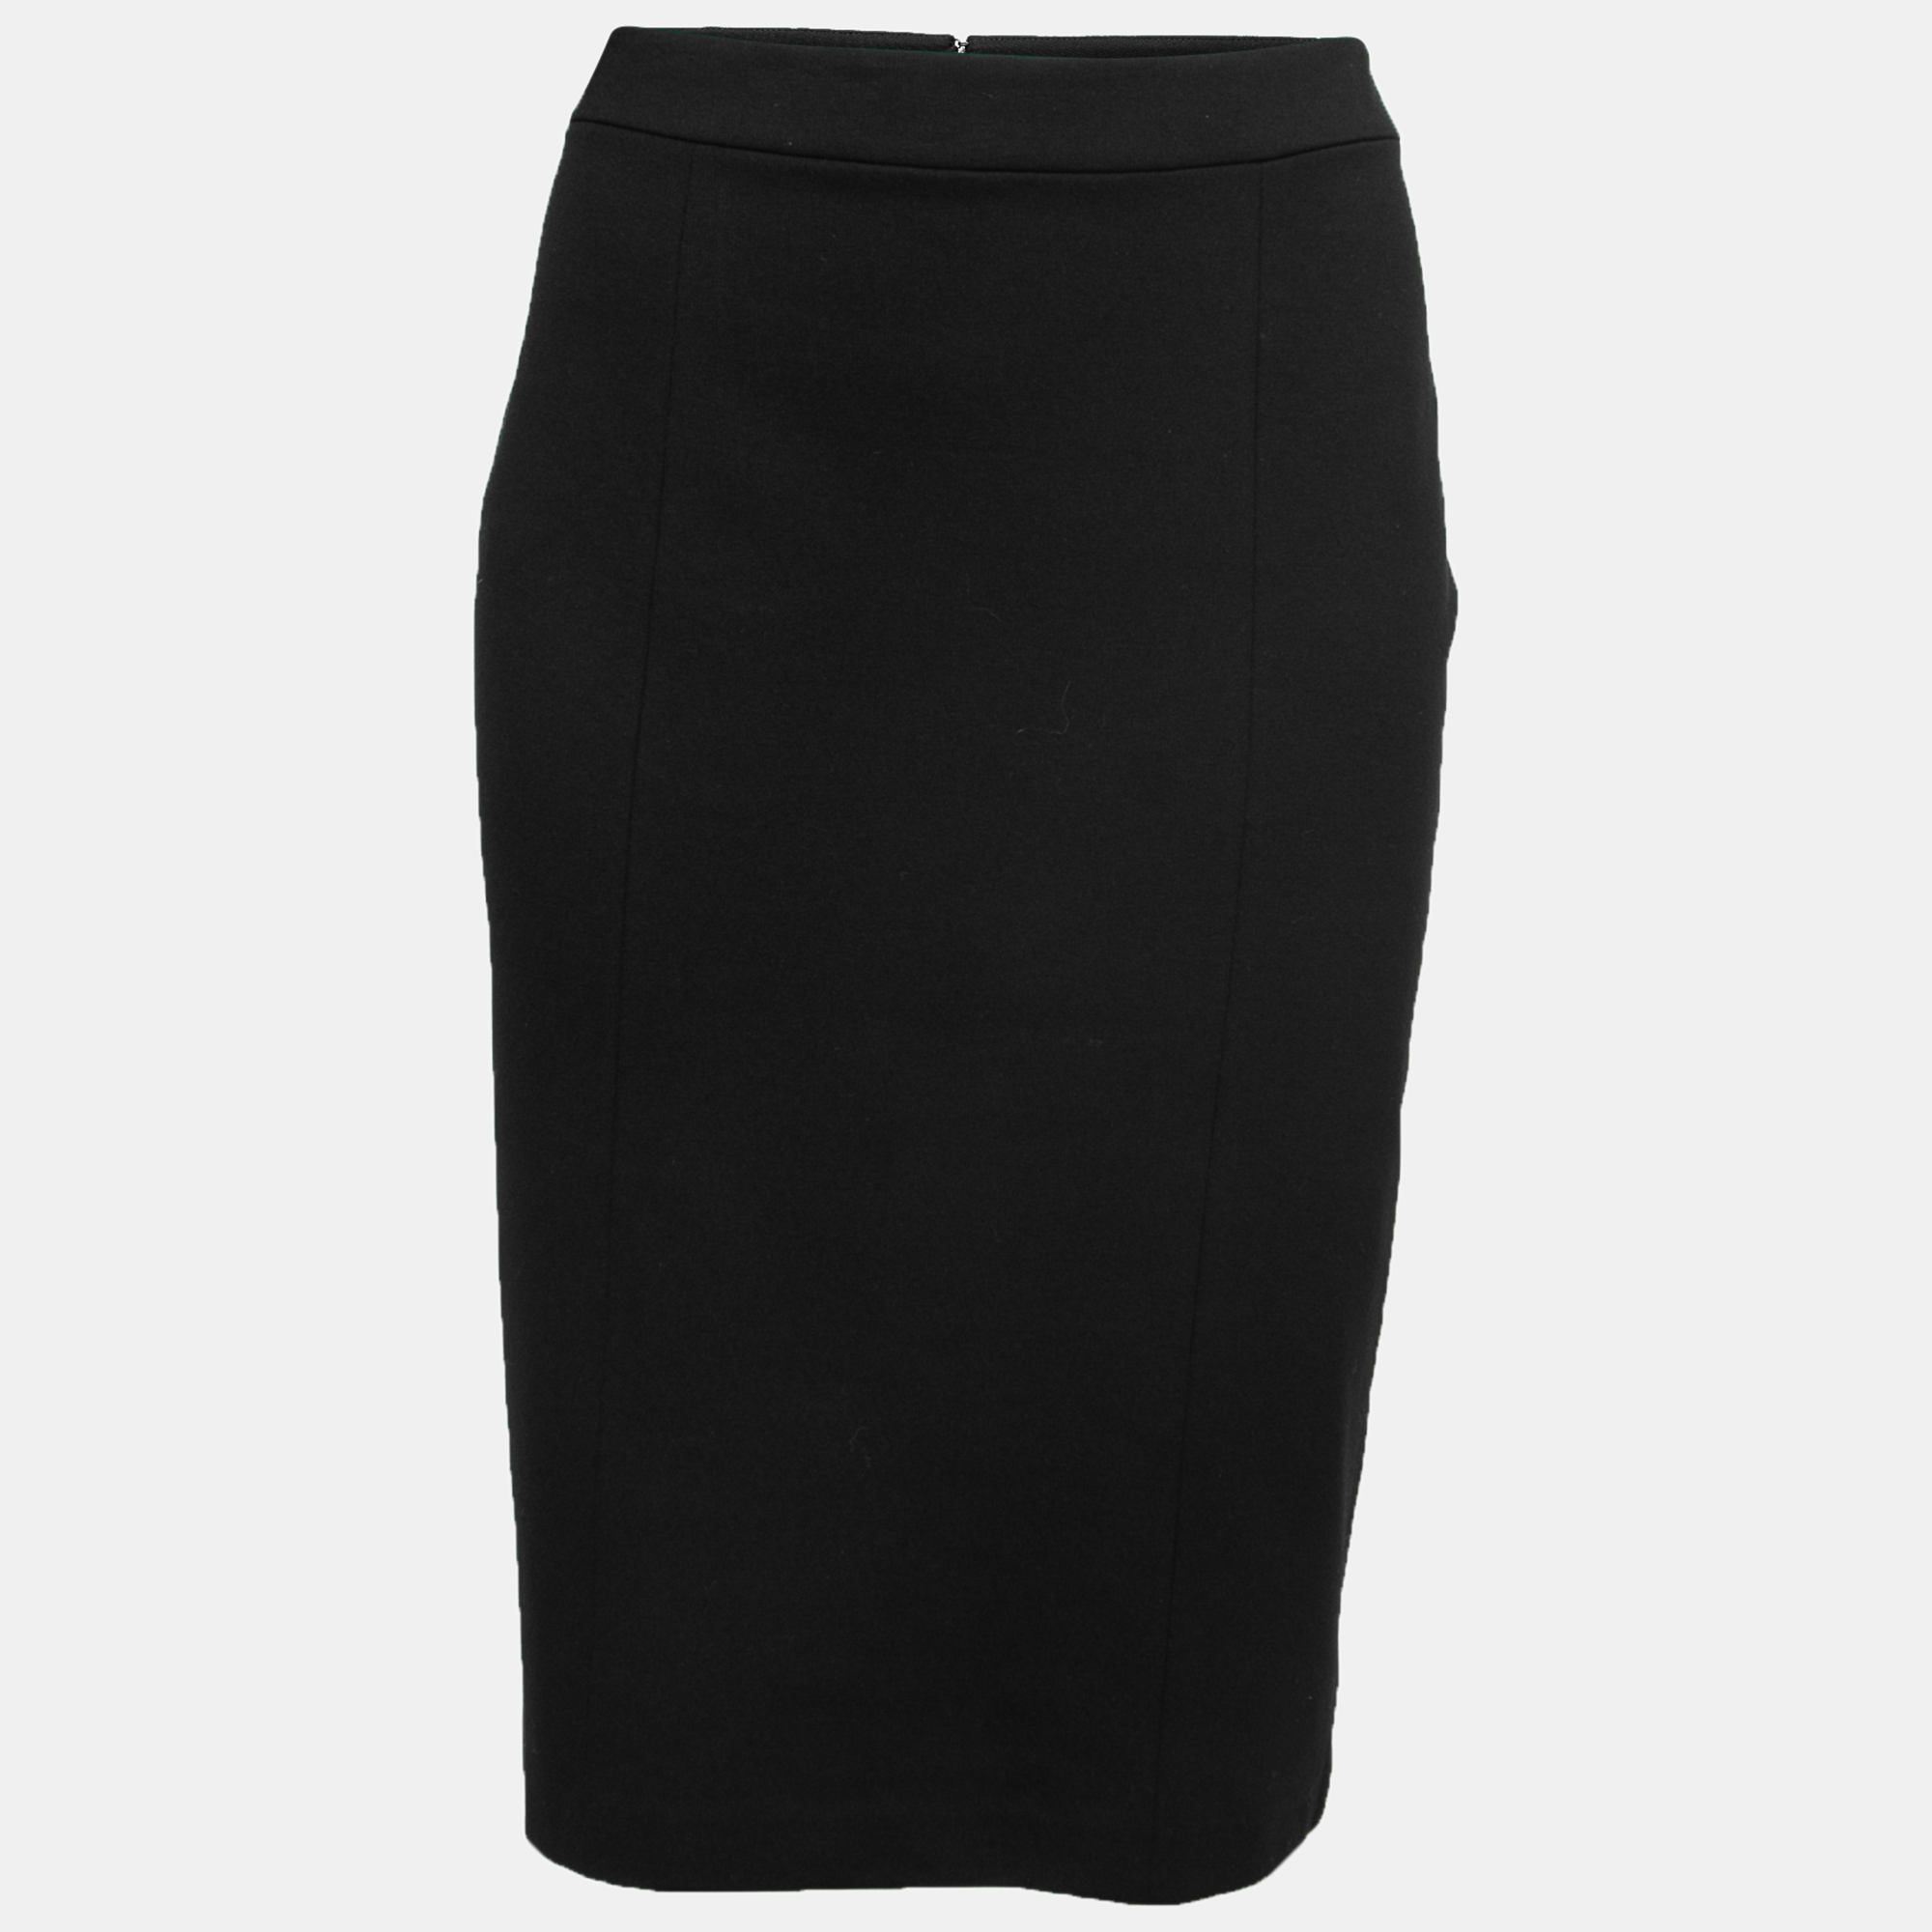 Pre-owned Armani Collezioni Black Stretch Knit Knee-length Skirt L